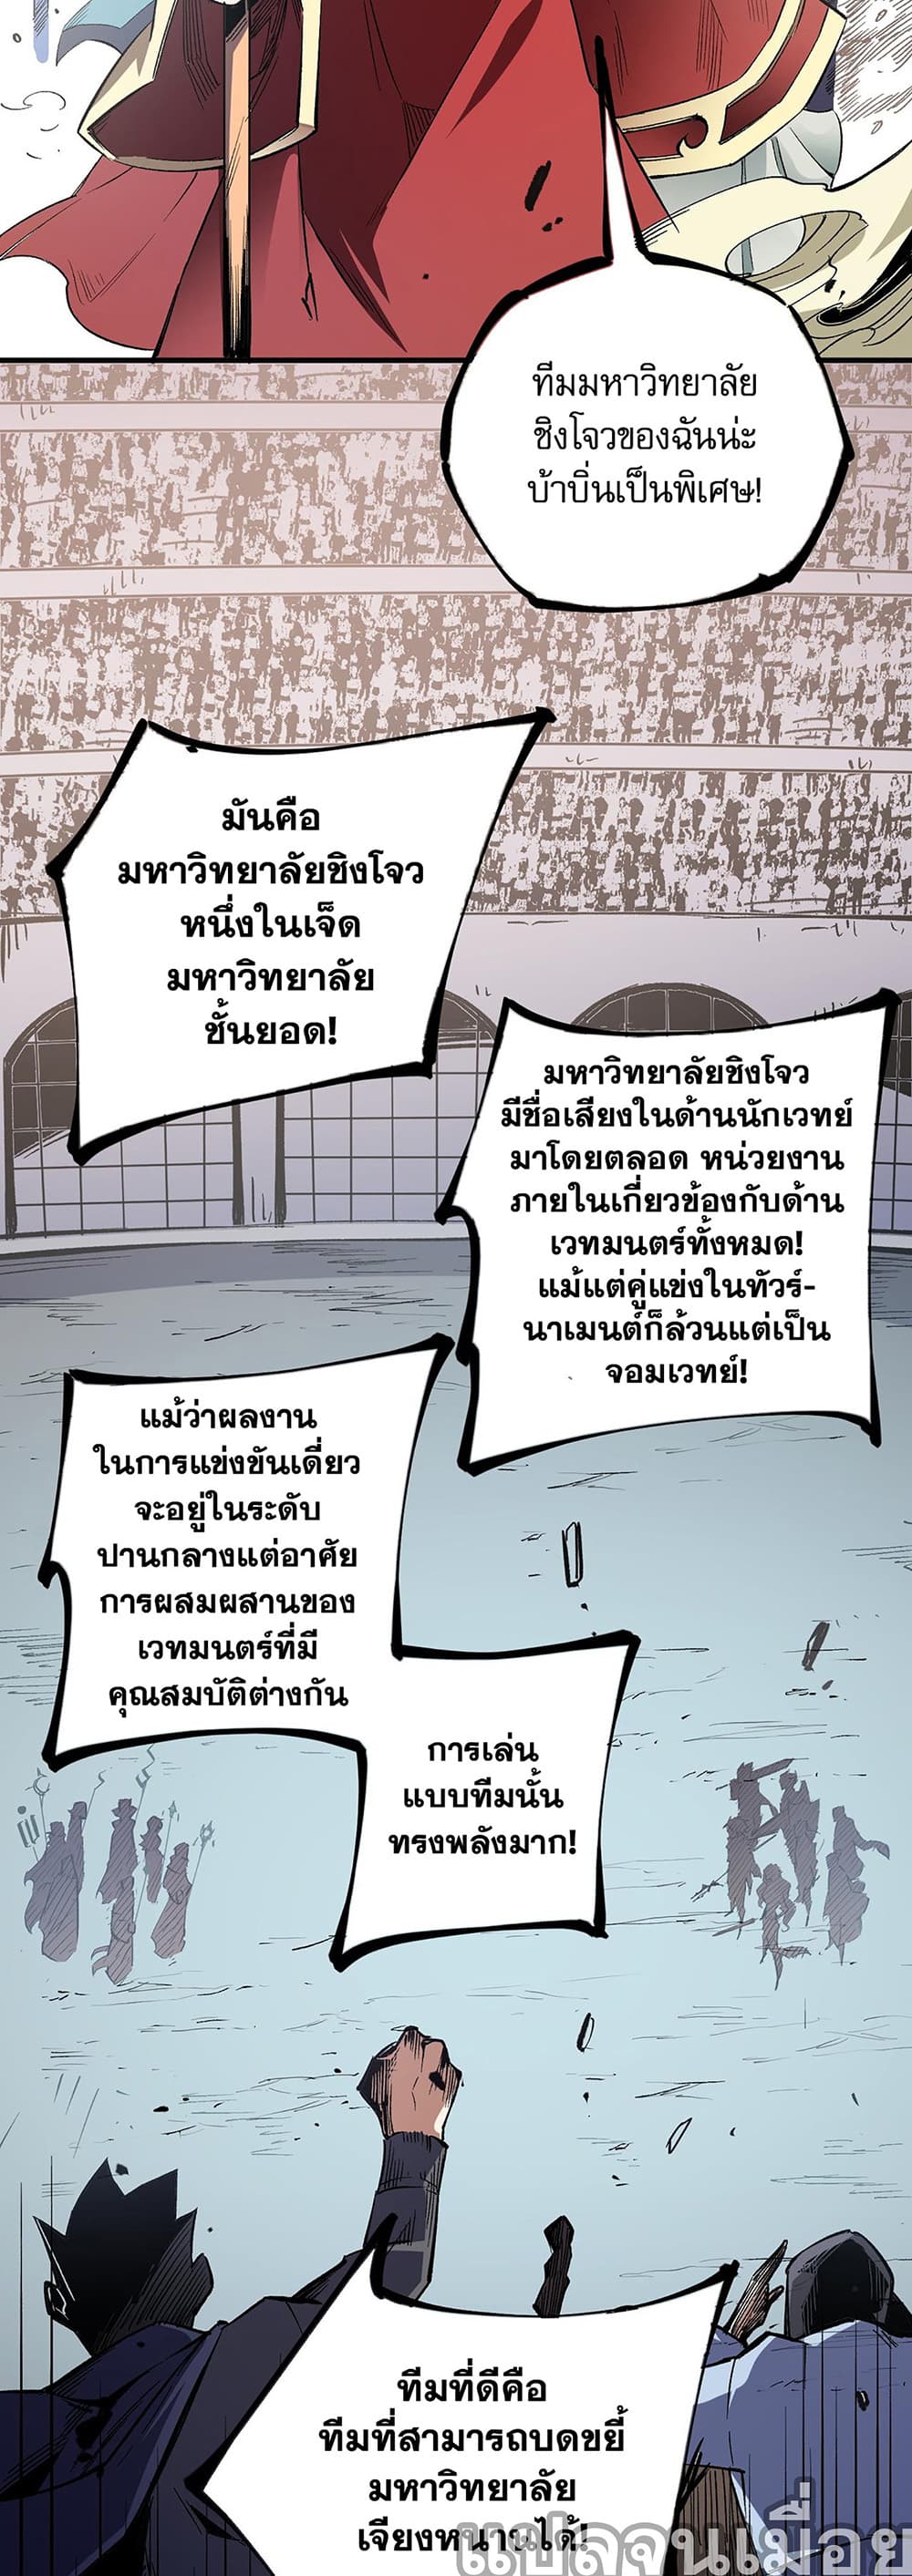 Job Changing for the Entire Population: The Jobless Me Will Terminate the Gods ฉันคือผู้เล่นไร้อาชีพที่สังหารเหล่าเทพ 34-34